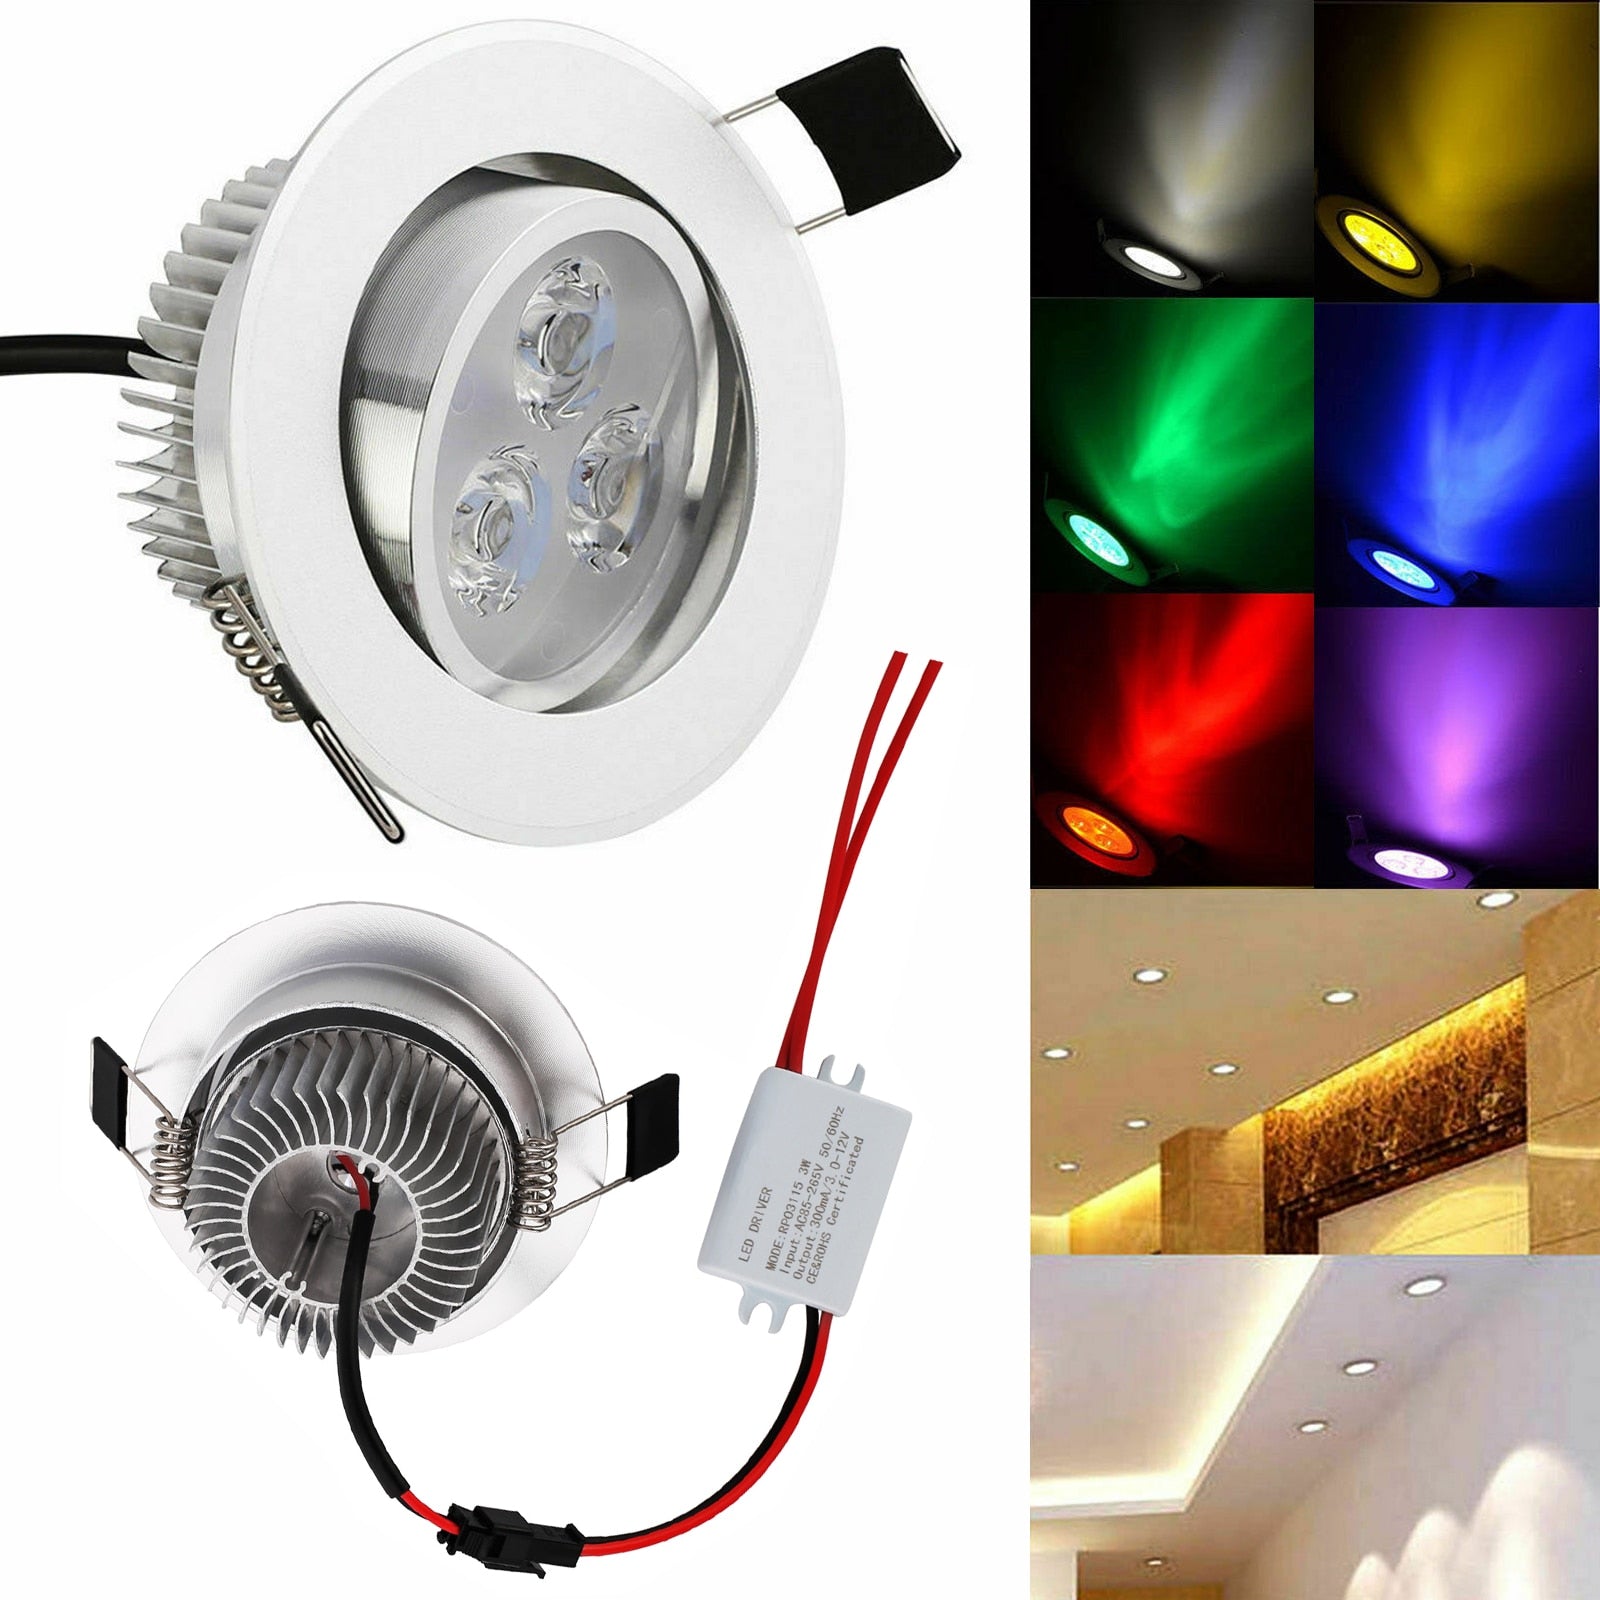 LED Recessed Ceiling Downlight Ultra Bright Lamp 8 Colors 6W AC220V 110V with Driver Down Light Spotlight for Home Hotel Decor